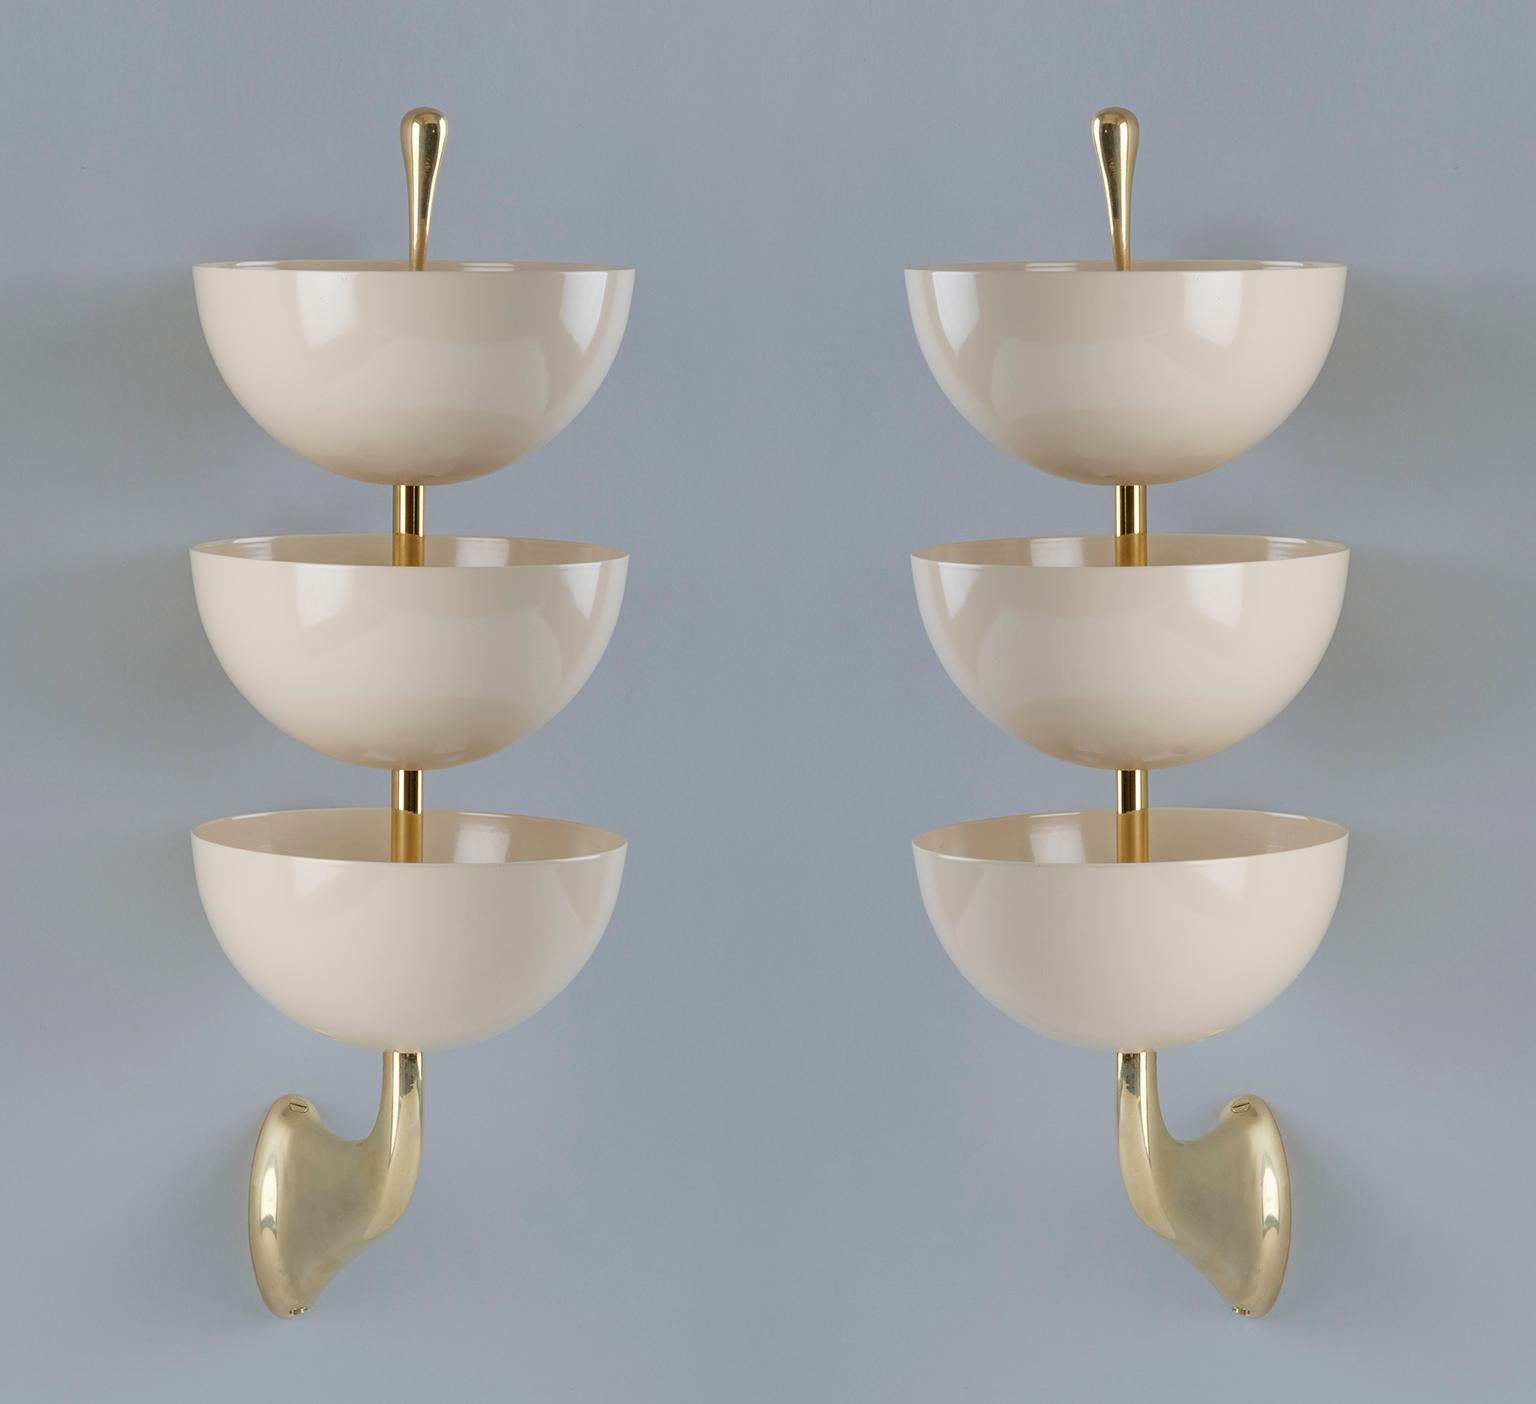 Mid-Century Modern Exquisite Pair of Tiered White Enamel and Brass Sconces by Stilnovo, Italy 1950s